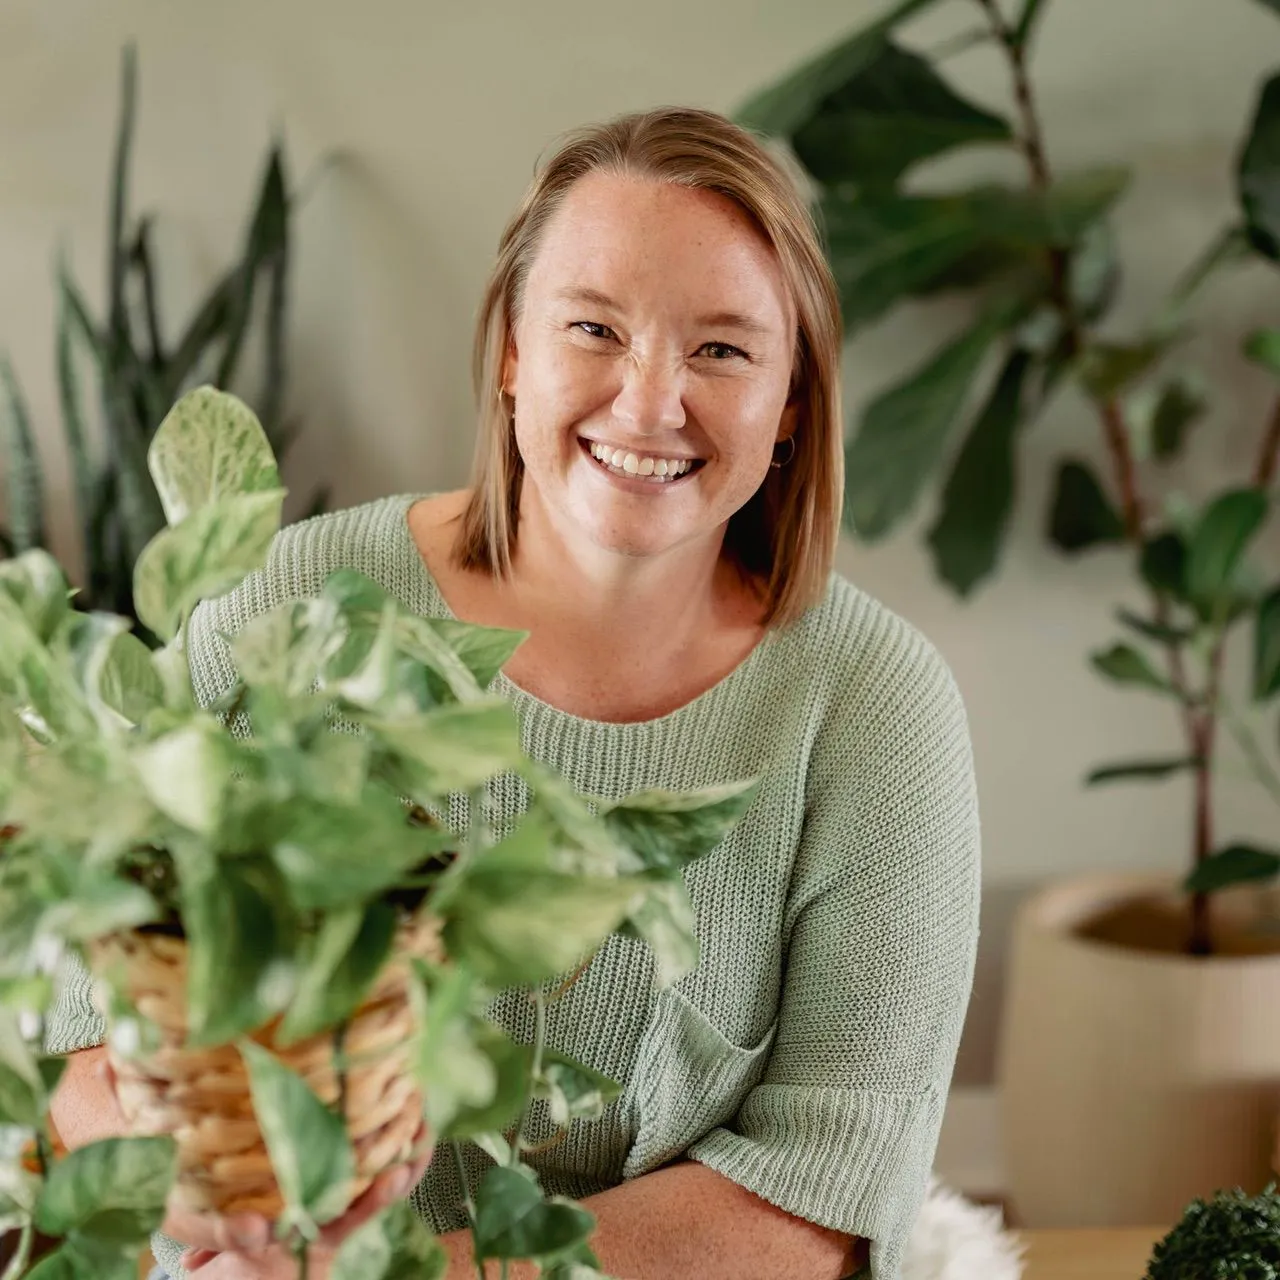 Kelsey Nelson, pictured with plants